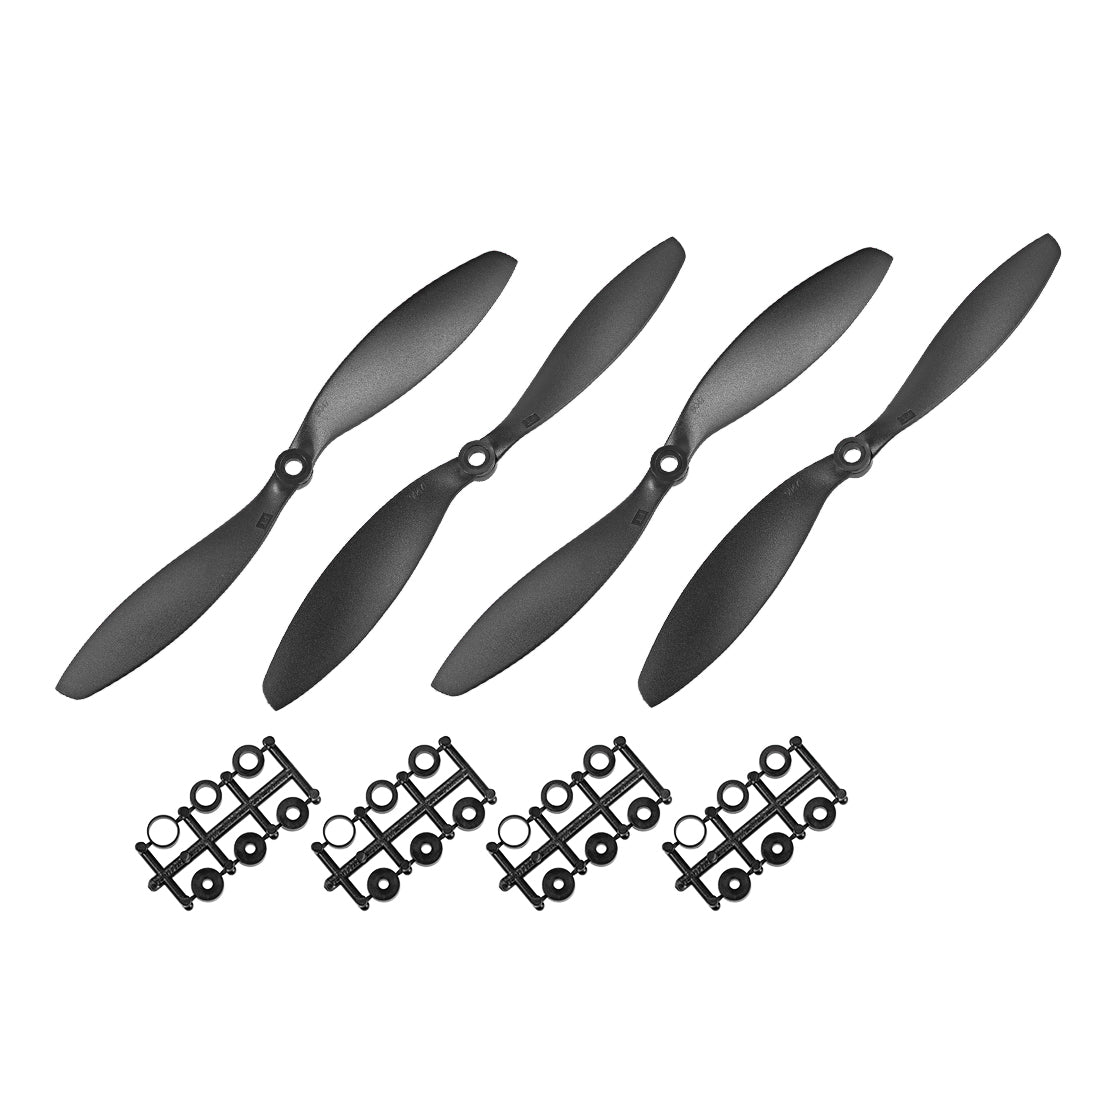 uxcell Uxcell RC Propellers CW CCW 9047 9x4.7 Inch 2-Vane Fixed-Wing for Airplane Toy, Nylon Black 2 Pair with Adapter Rings